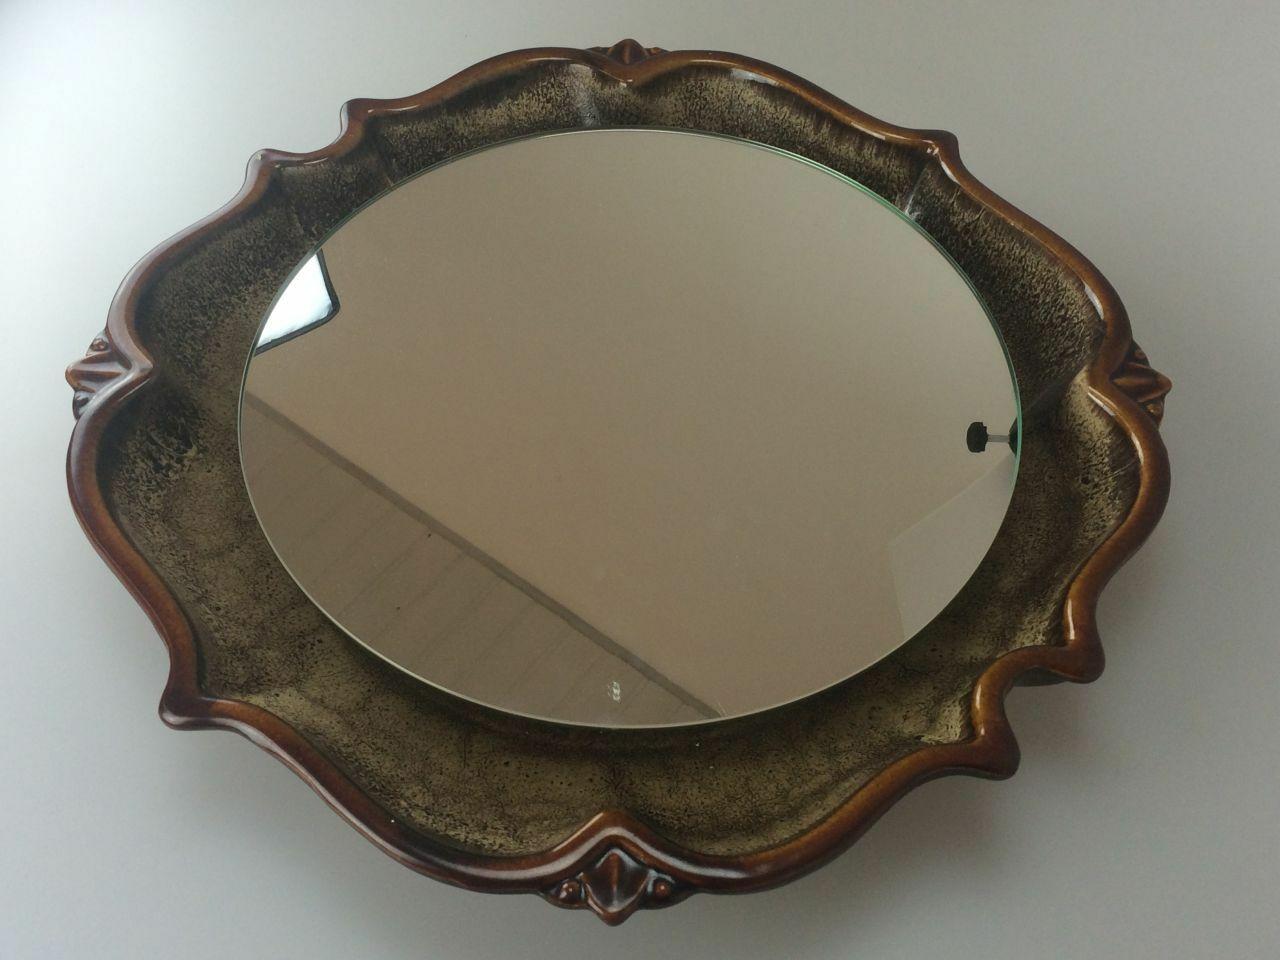 60s 70's Wall Mirror Ceramic Pan Illuminated Space Age Design For Sale 1